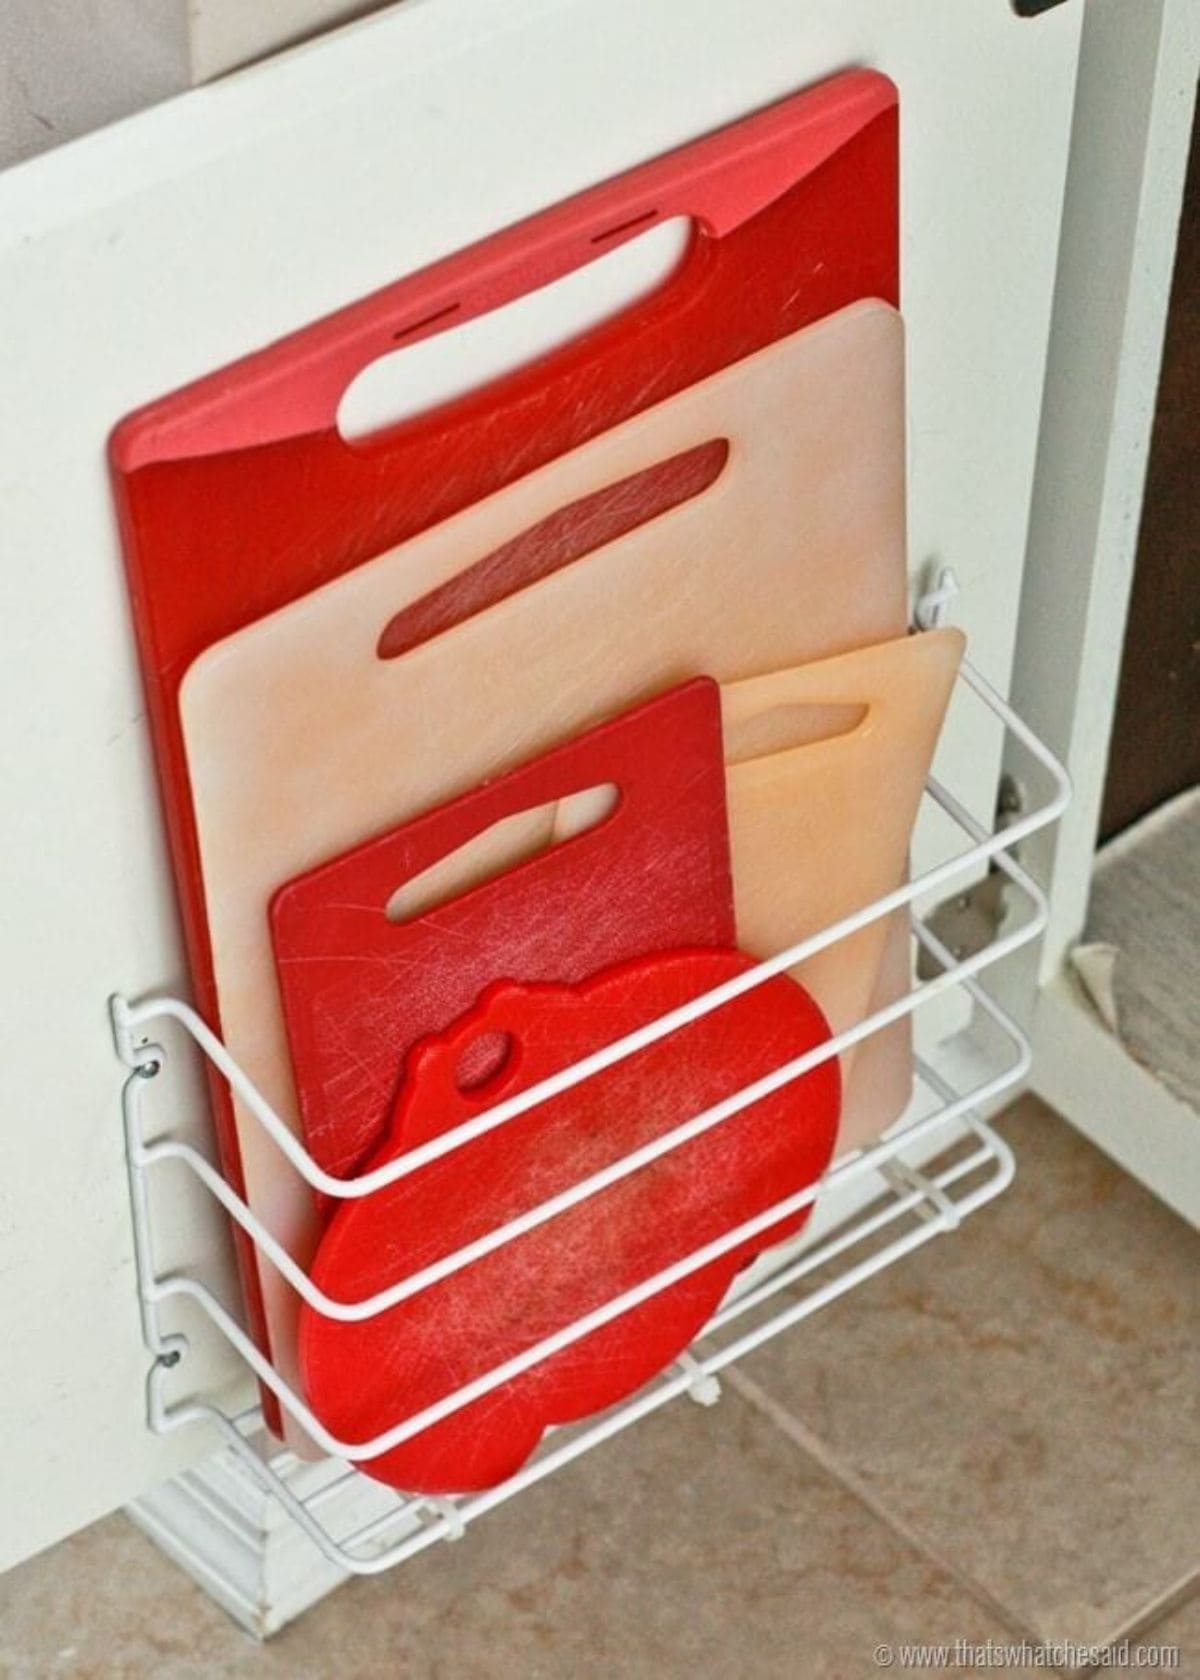 Inside the door of a cupboard a wire magazine rack has been fitted. Inside are red and white chopping boards